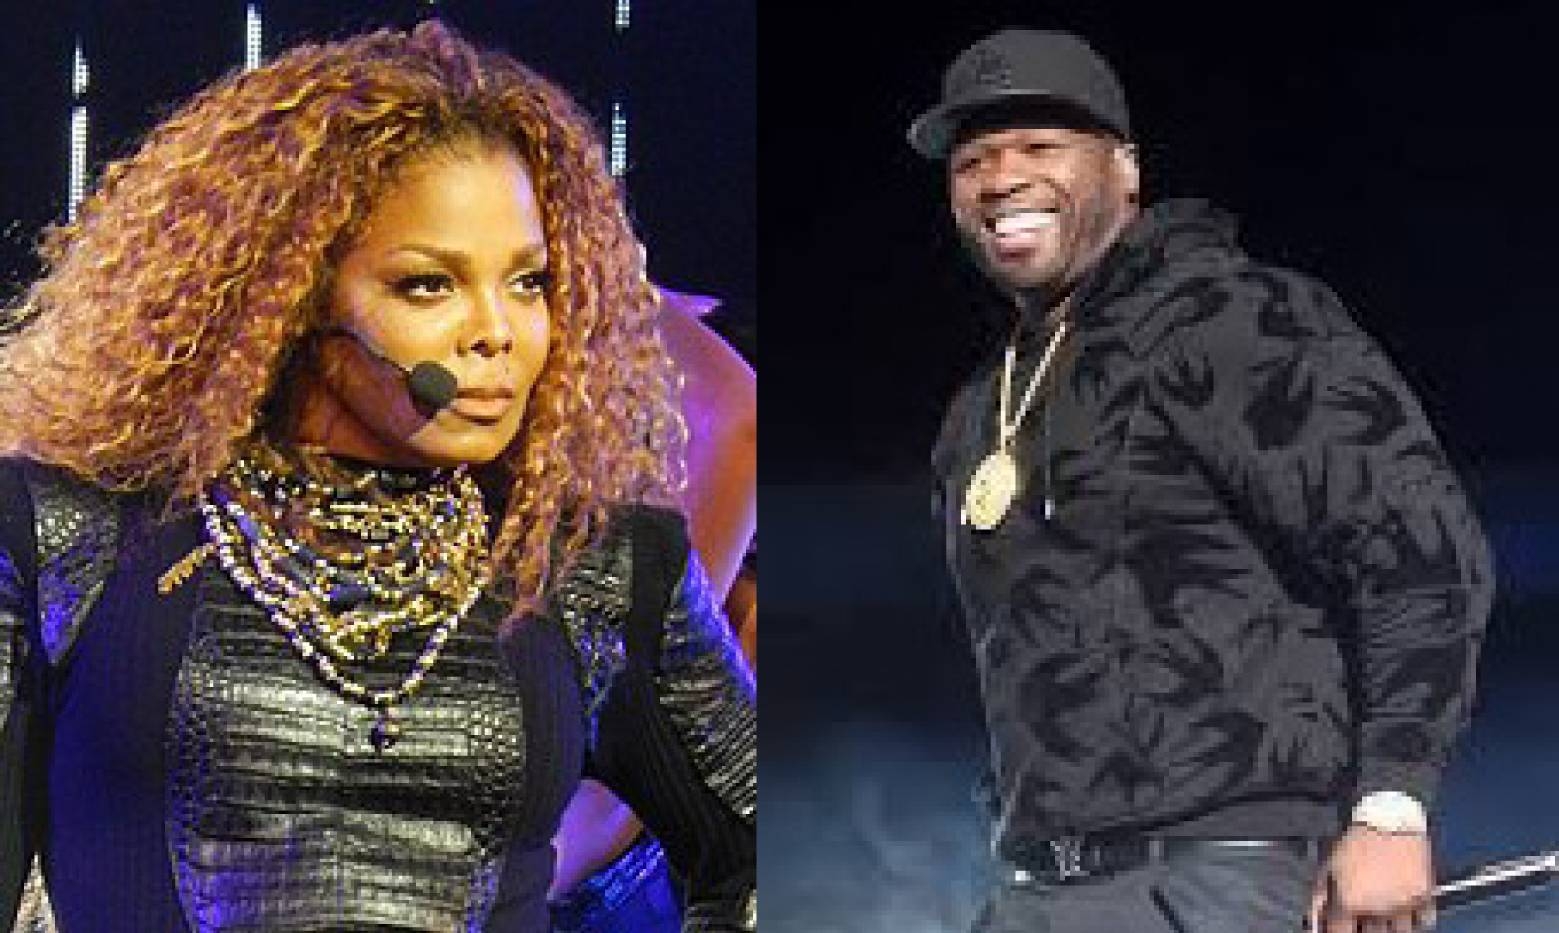 A combo picture shows pop icon Janet Jackson, left, and rapper 50 Cent who are among musicians set to perform in Saudi Arabia organizers said Wednesday.